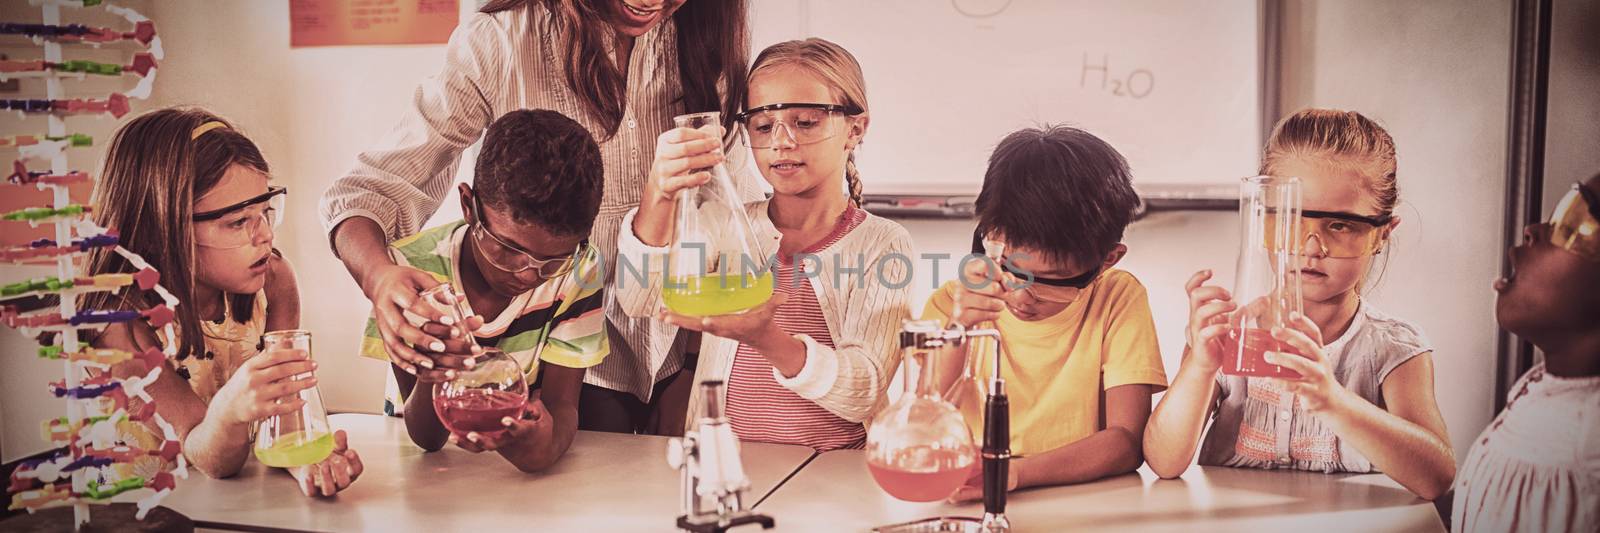 Pupils learning science with teacher by Wavebreakmedia